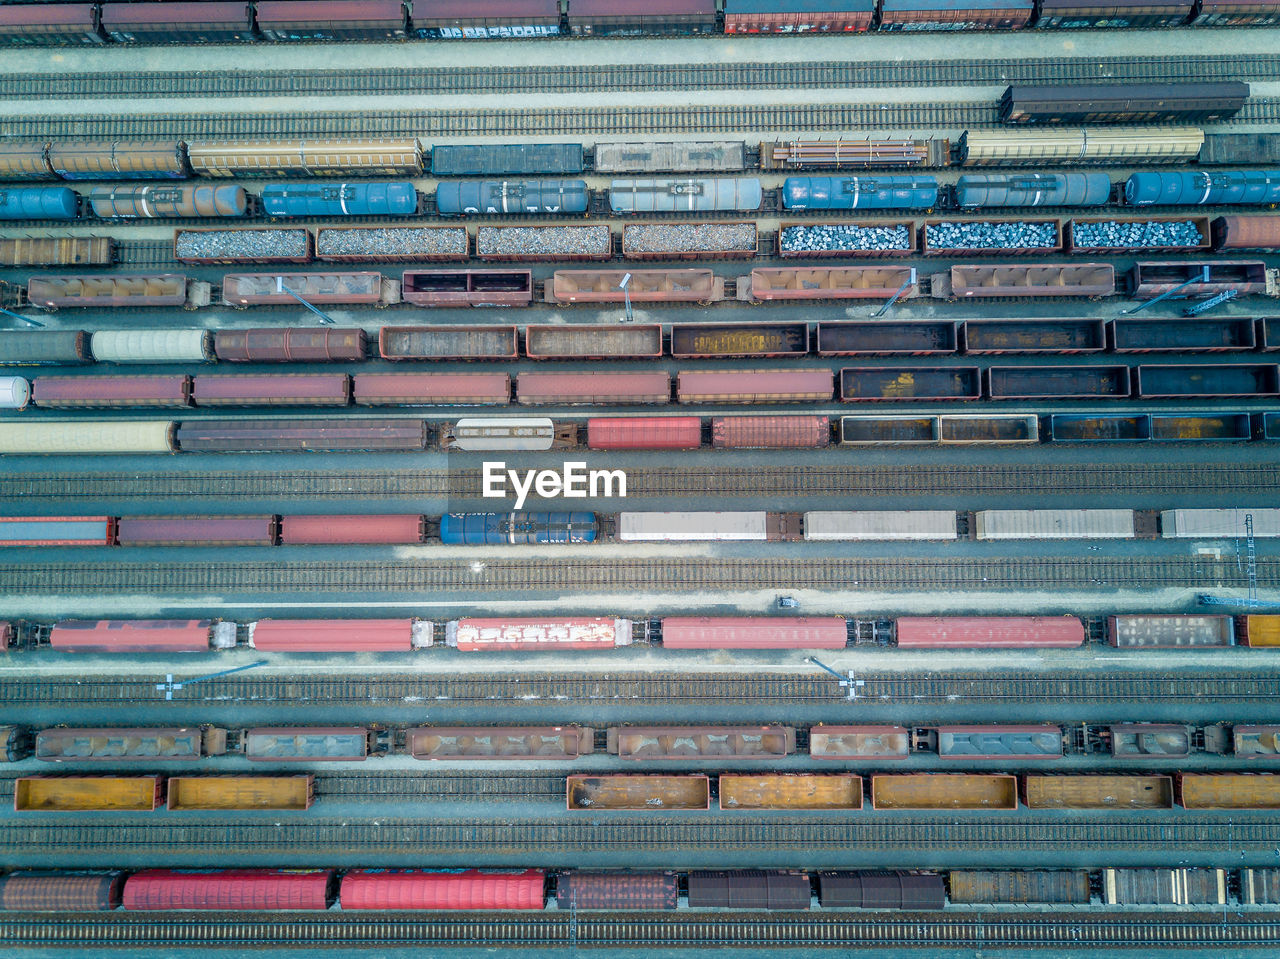 Aerial view of freight train